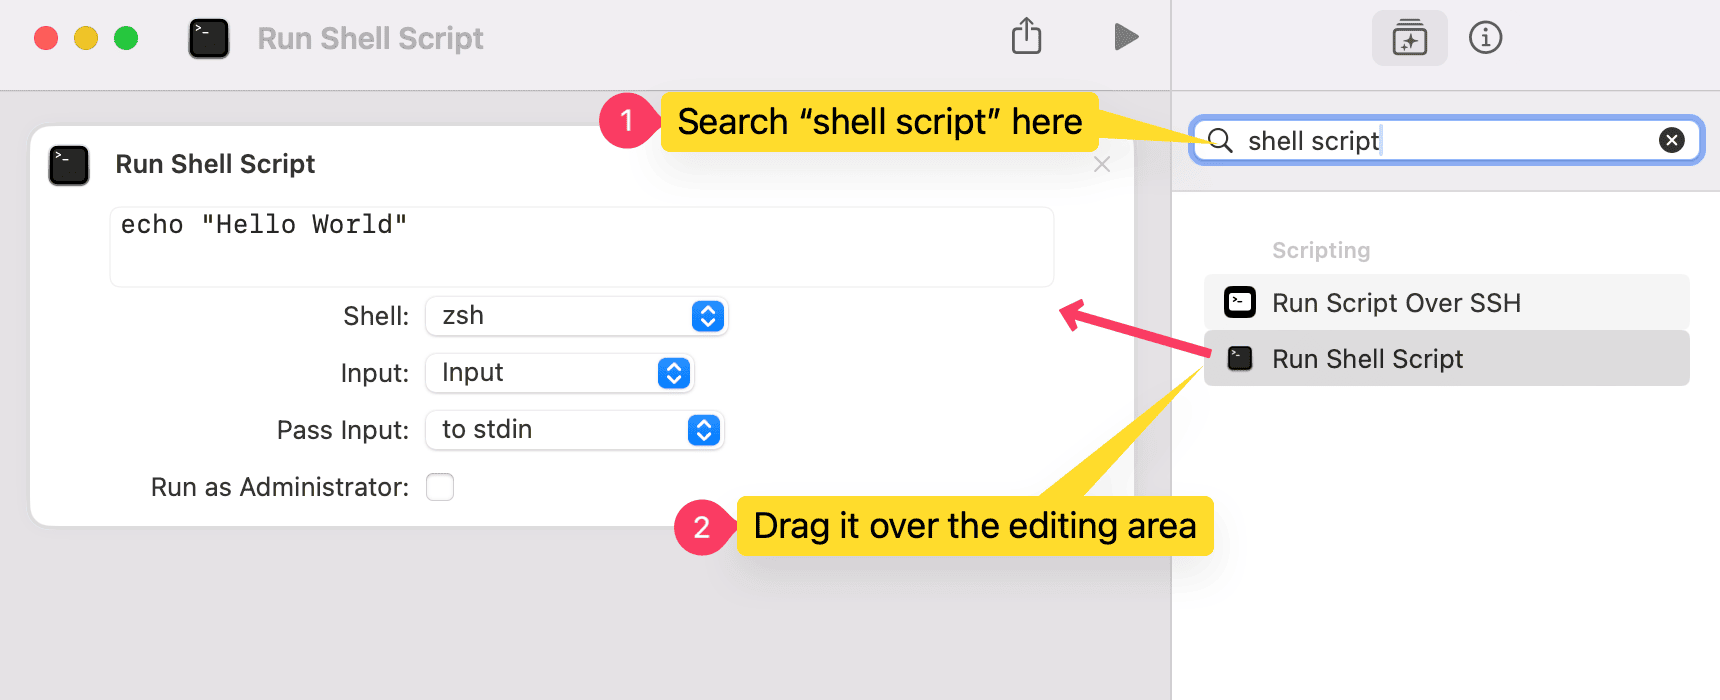 How to create a shortcut for a shell script through the Shortcuts.app on Mac